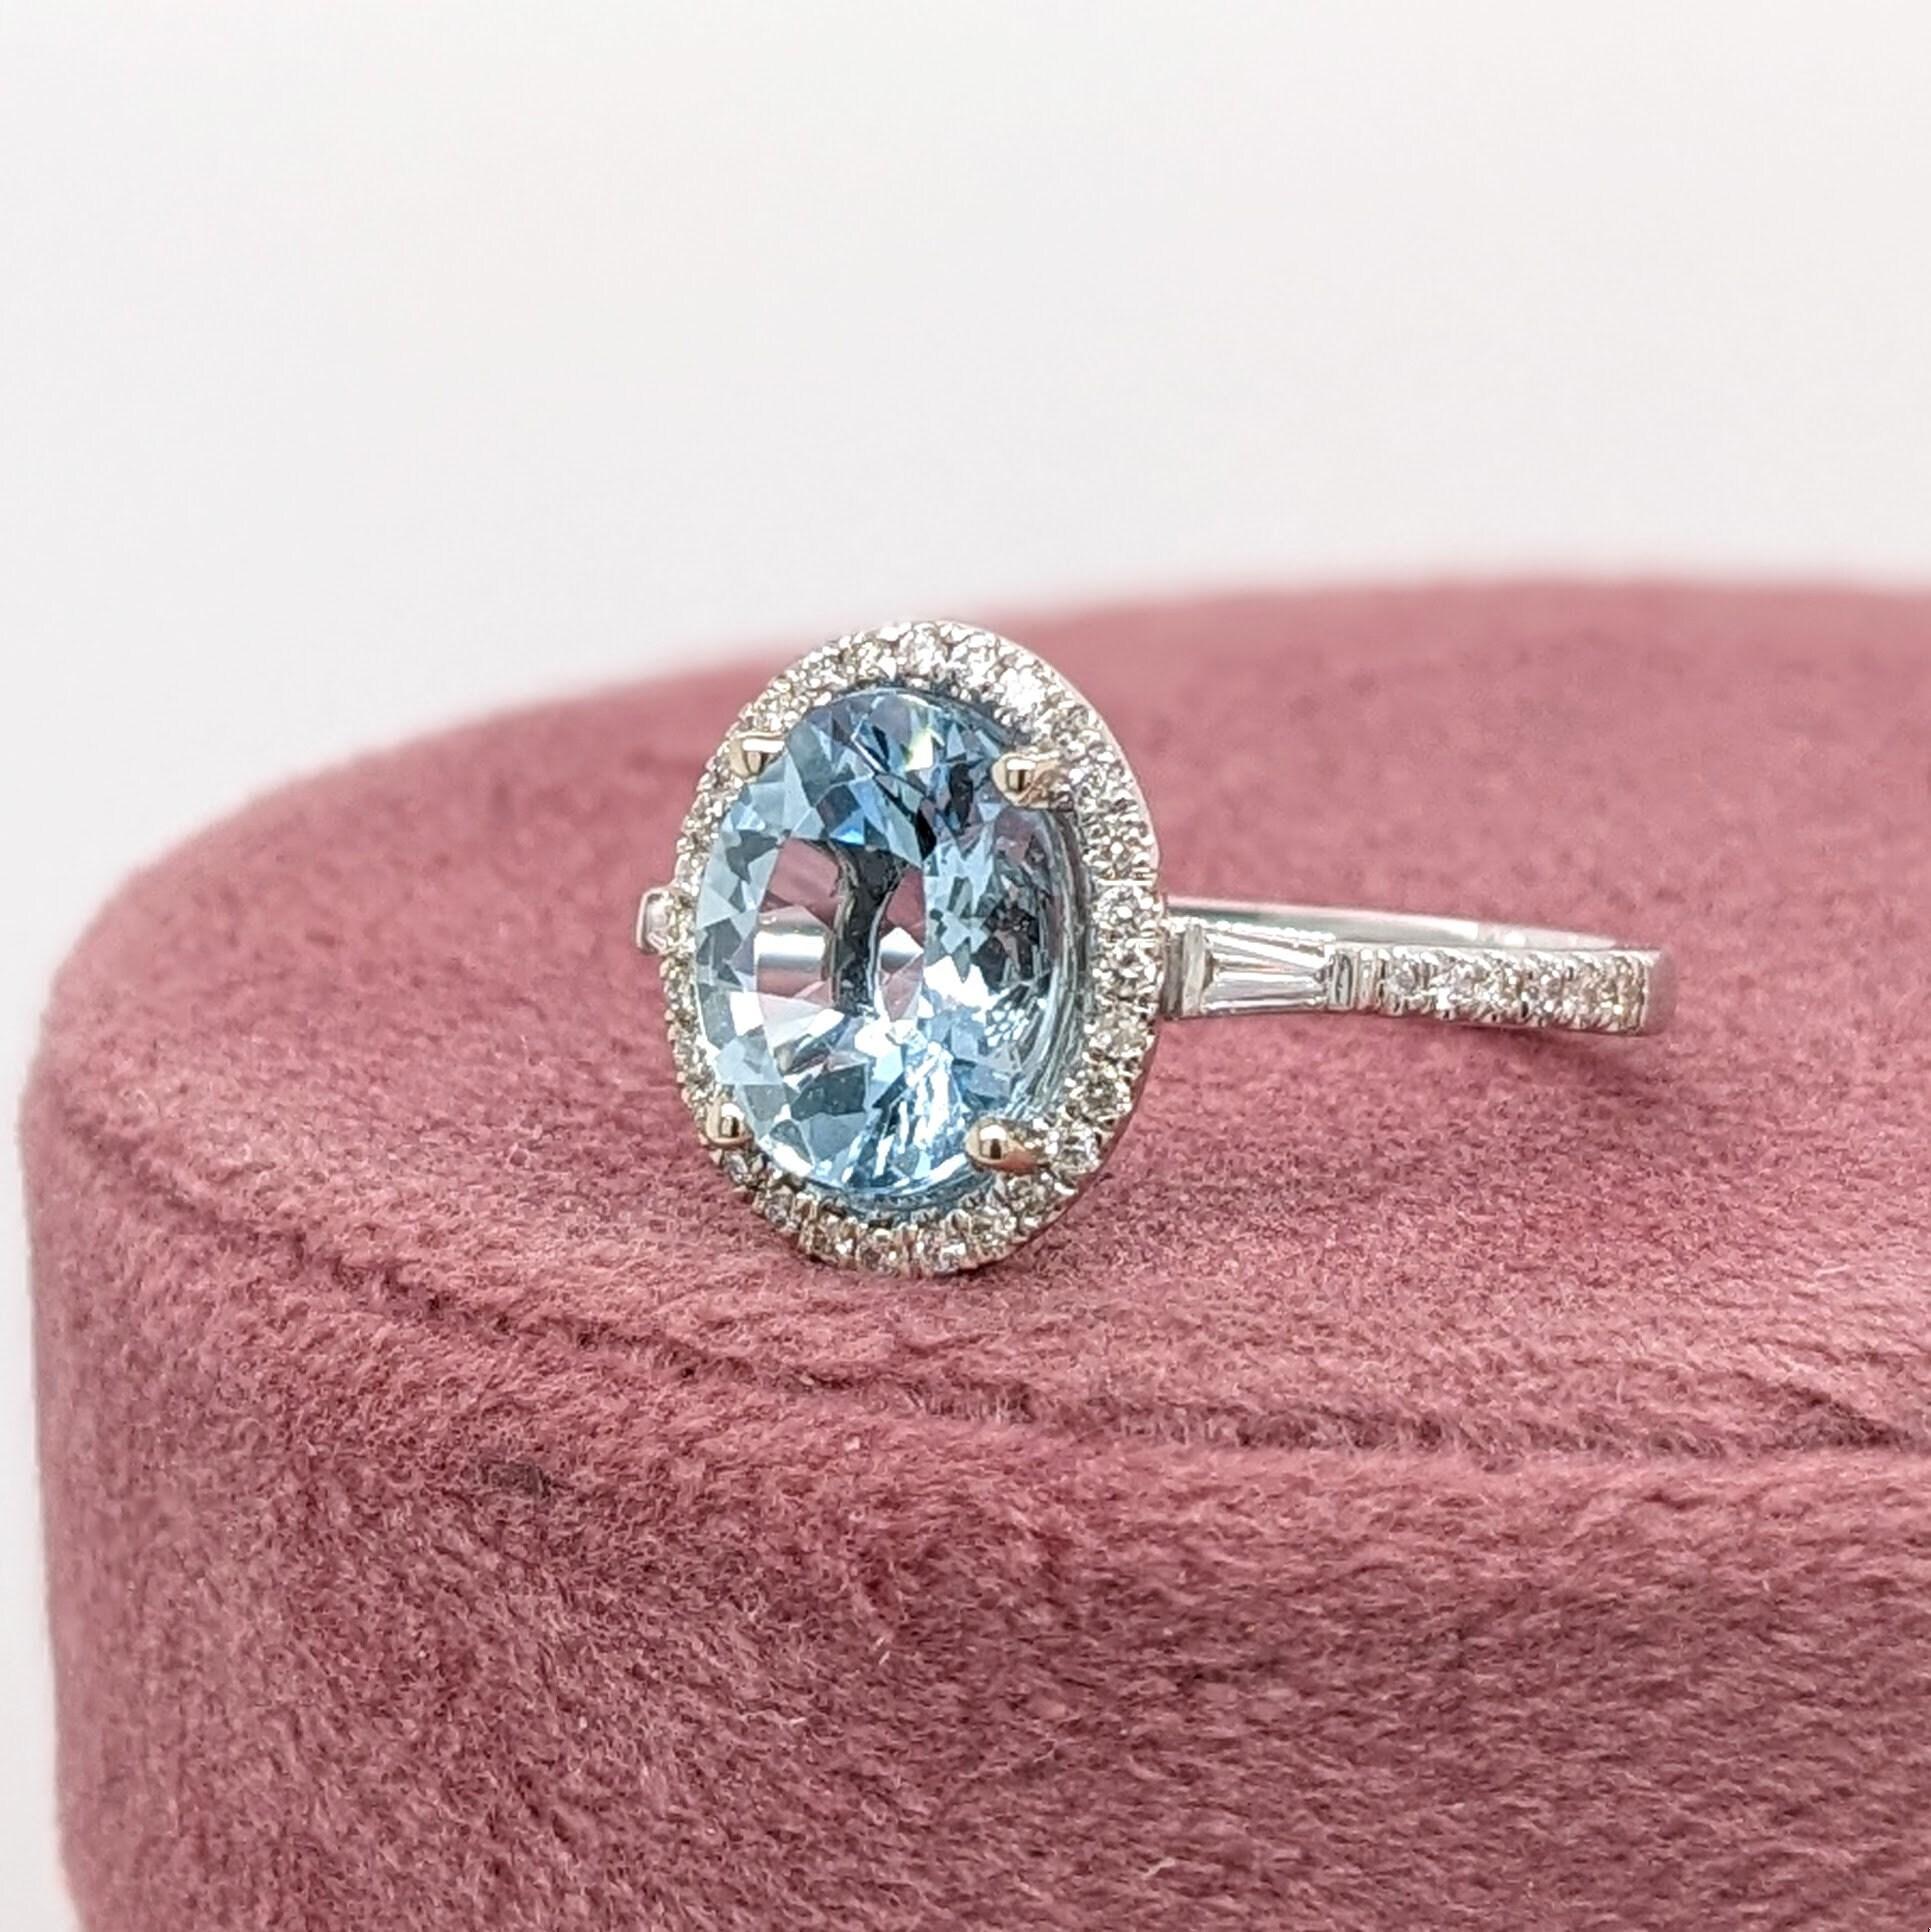 Modern 1.7ct Aquamarine Ring w Earth Mined Diamonds in Solid 14K White Gold Oval 10x8mm